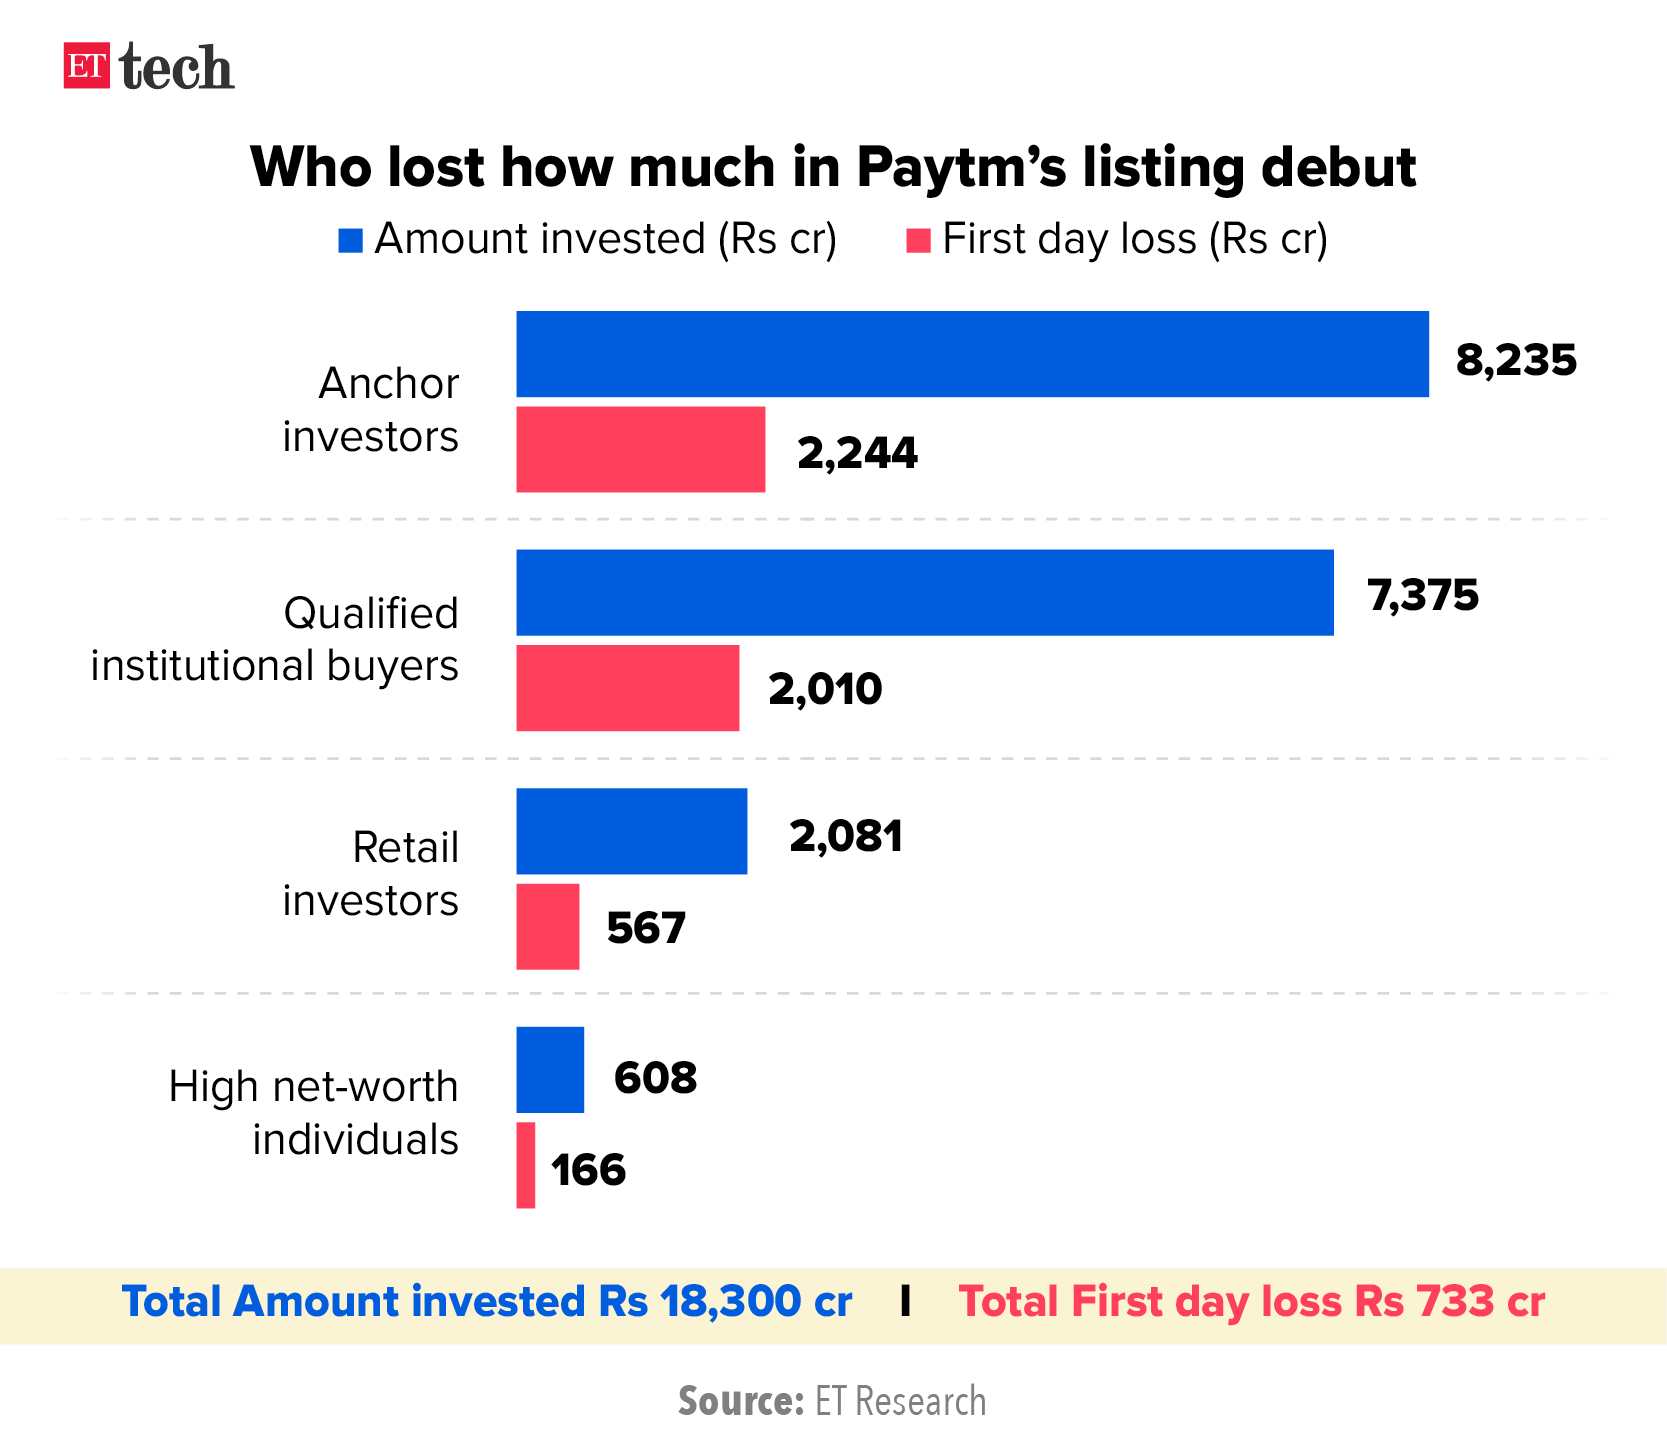 Who lost how much in Paytm